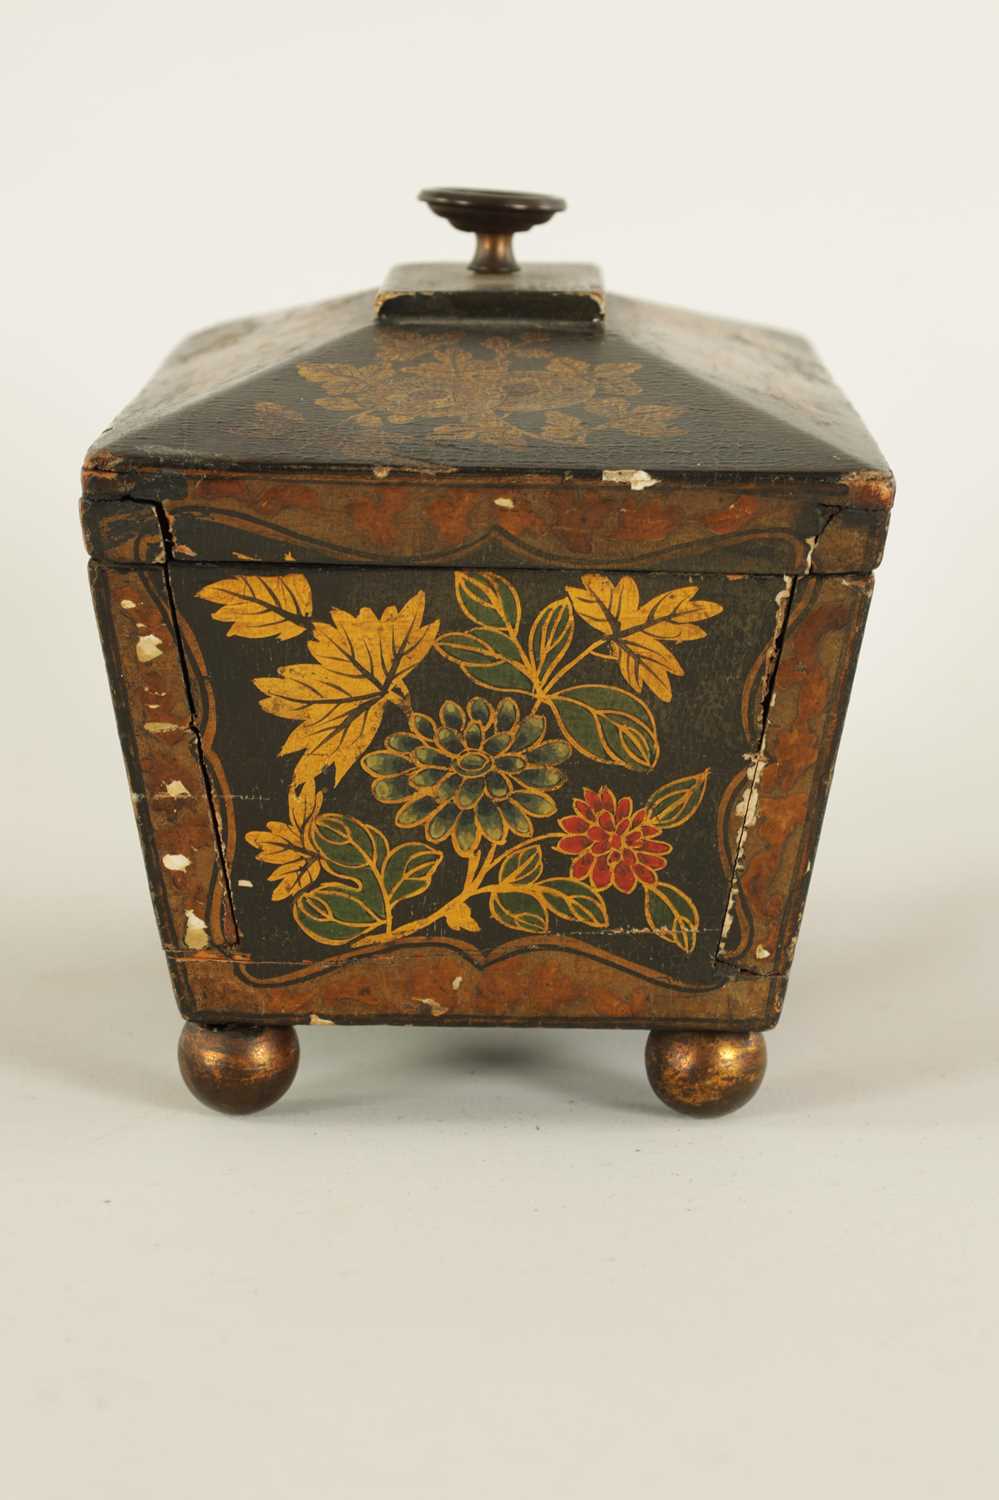 A LATE GEORGIAN CHINOISERIE DECORATED BLACK LACQUER SARCOPHAGUS TEA CADDY - Image 7 of 8